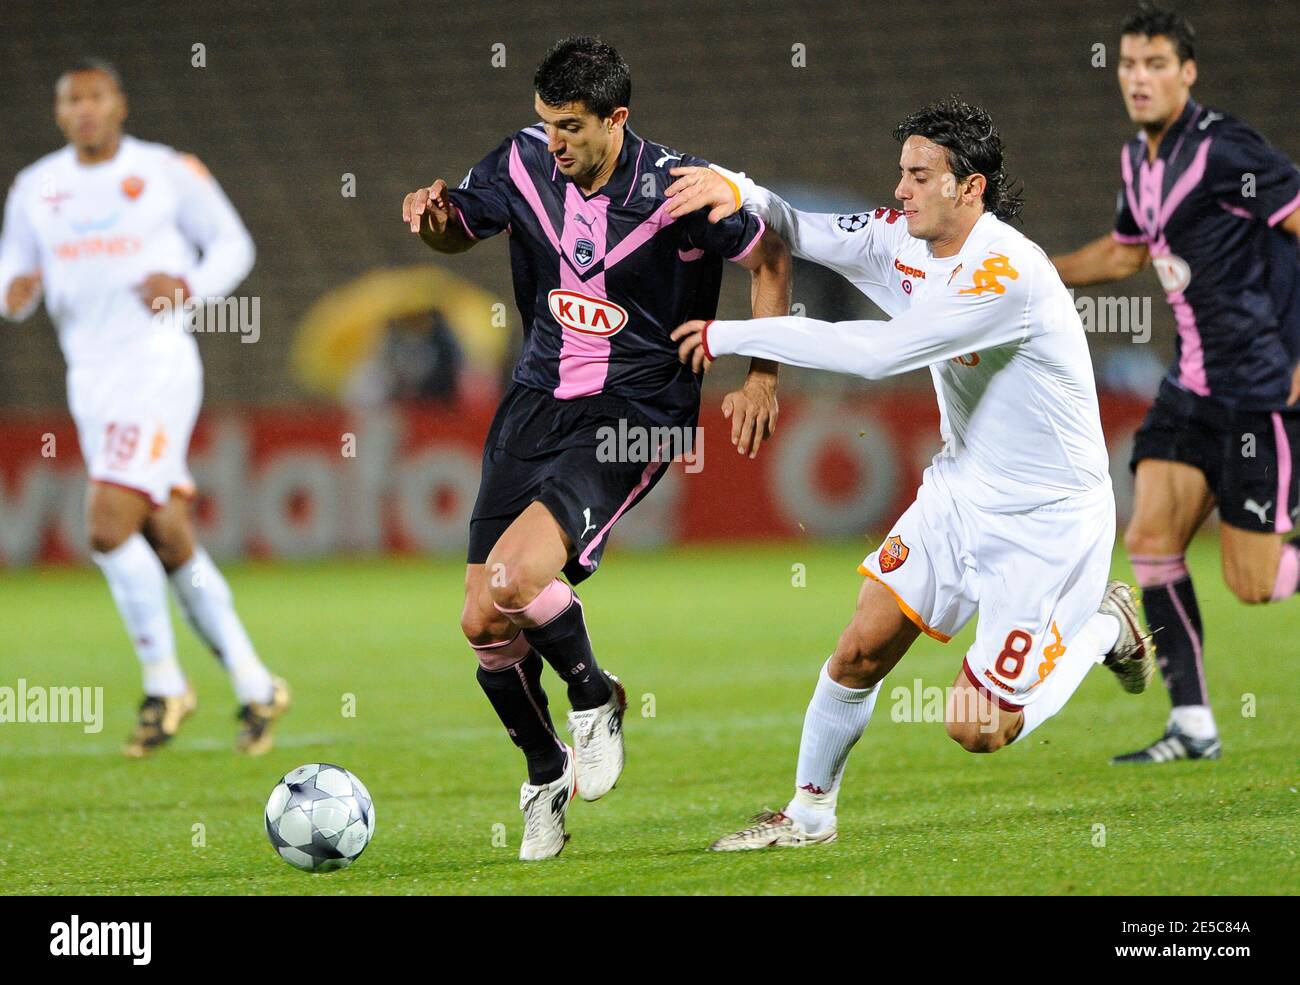 Bordeaux' Fernando Menegazzo and Roma's Alberto Aquilani during the UEFA Champions League Soccer match, Girondins de Bordeaux vs AS Roma at the Chaban-Delmas stadium in Bordeaux, France on October 1, 2008. AS Roma won 3-1 Photo by Willis Parker/Cameleon/ABACAPRESS.COM Stock Photo